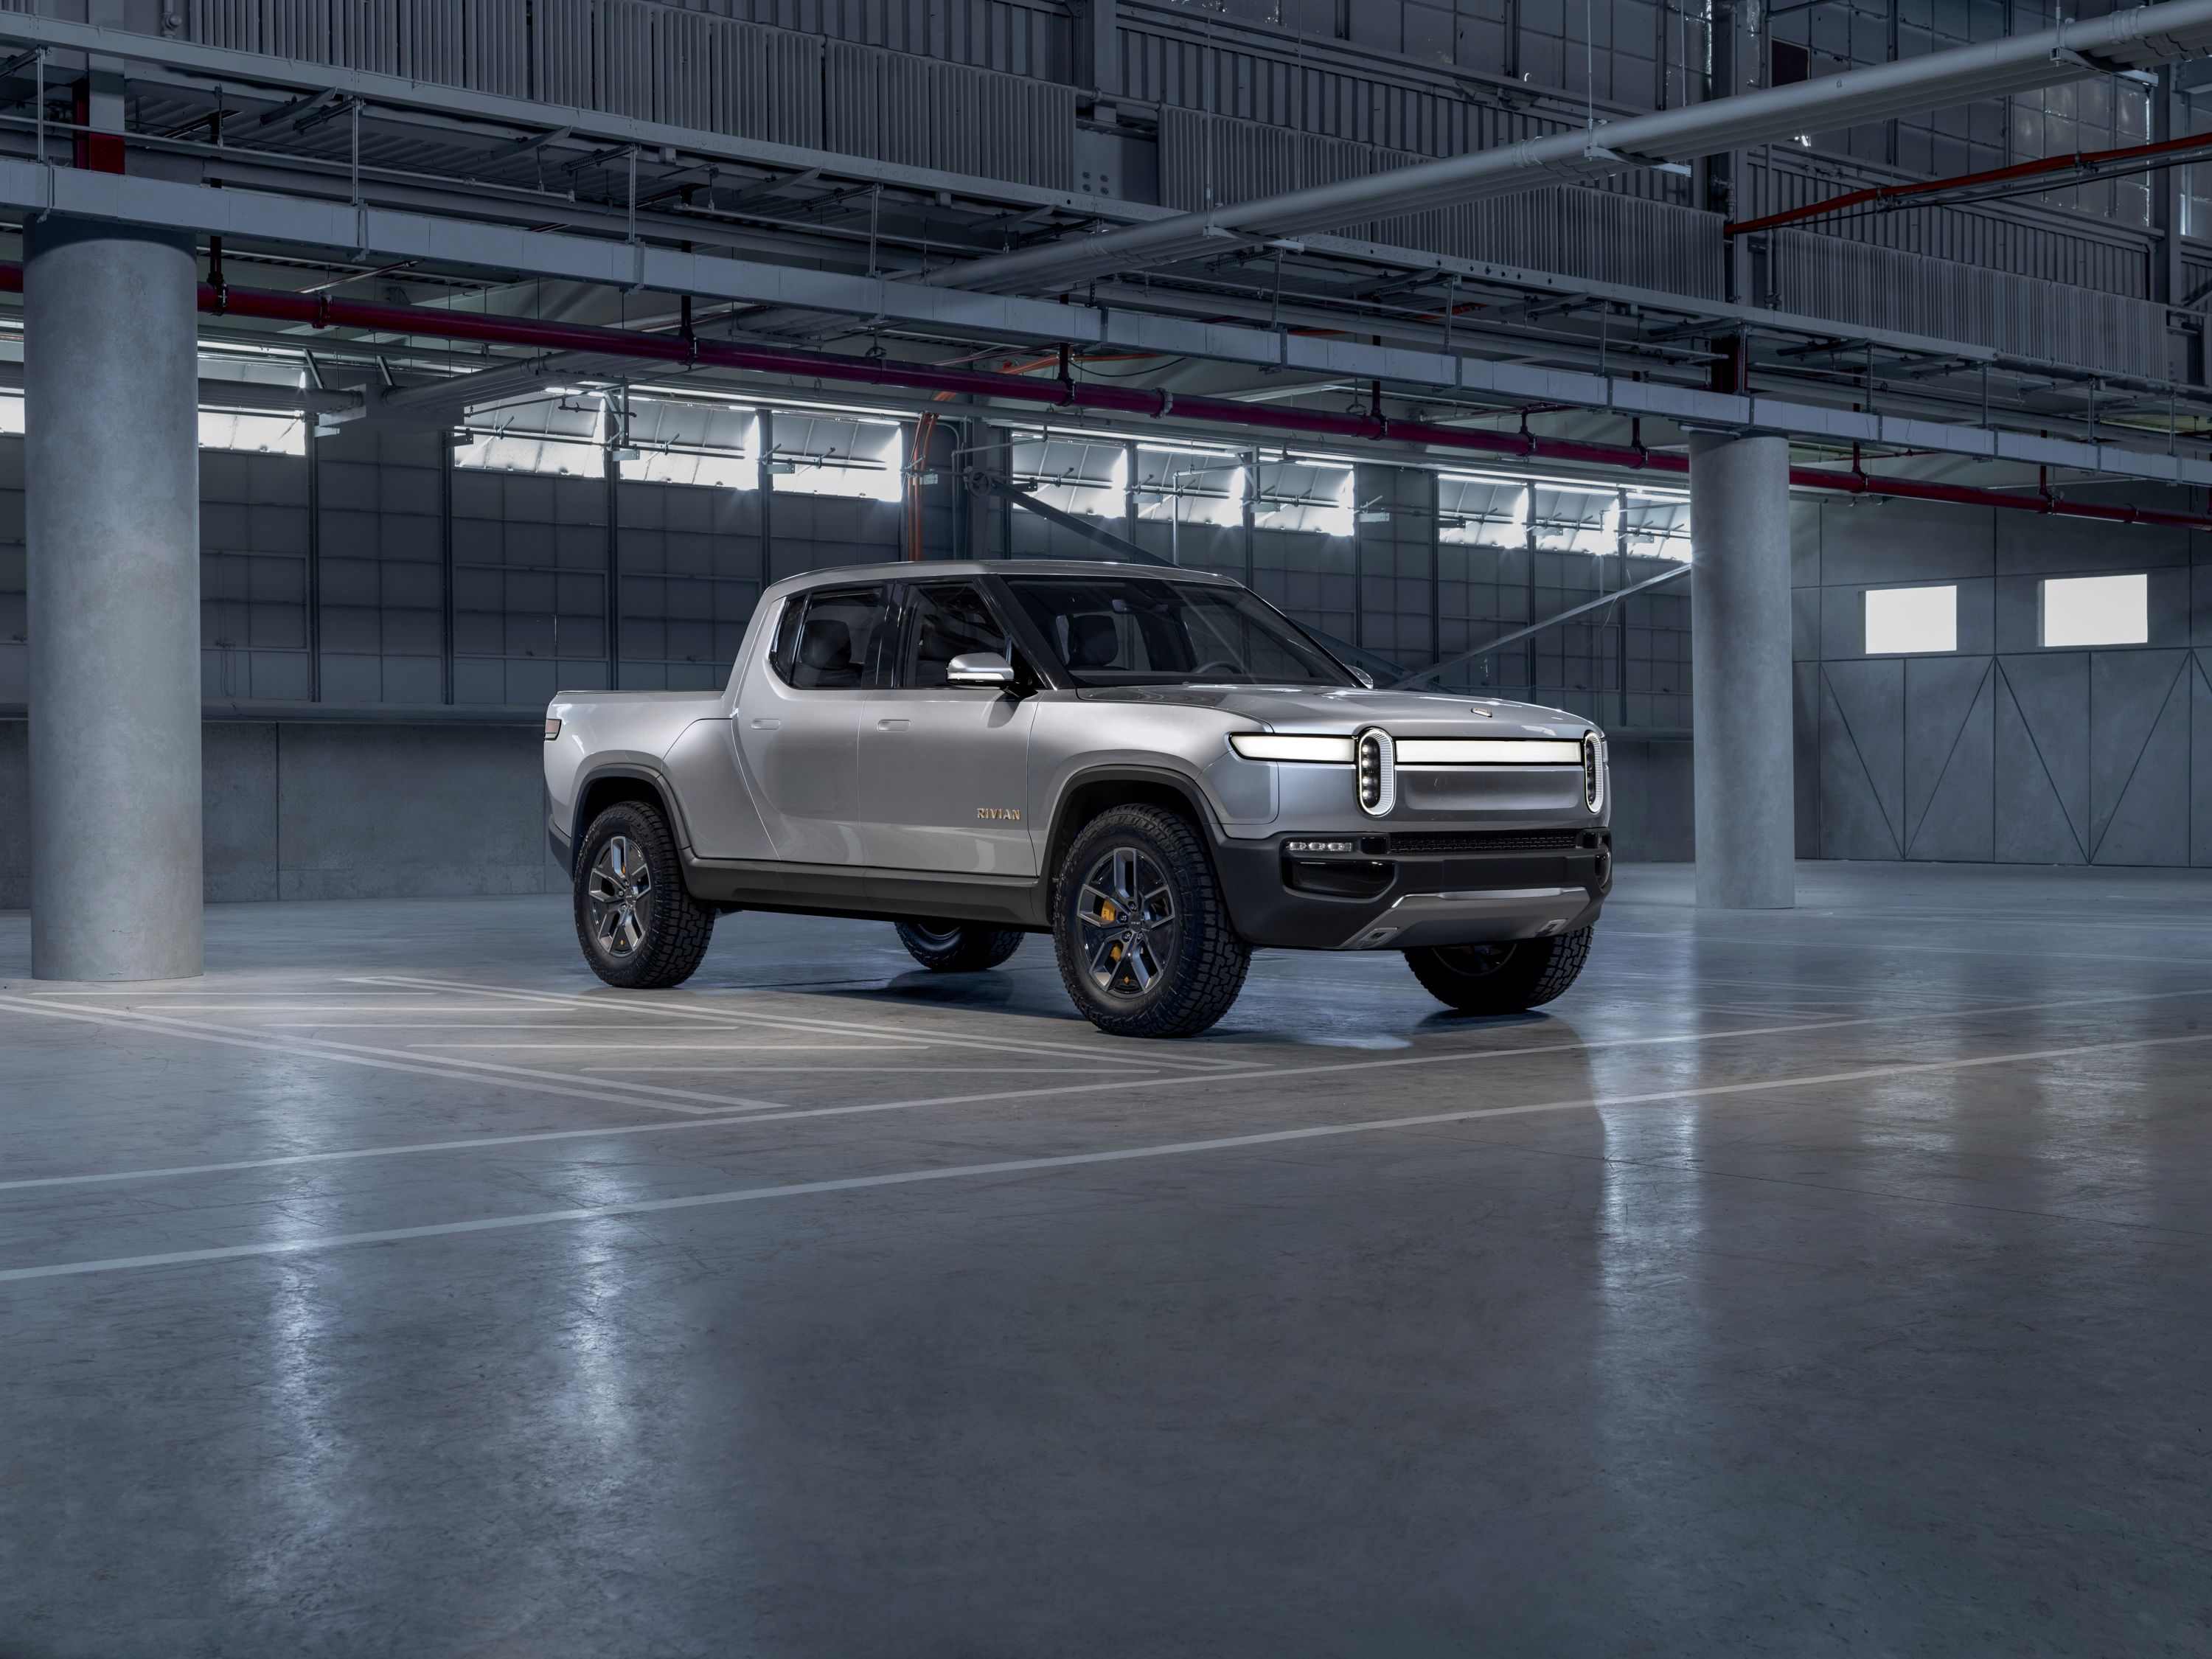 2021 After Tank Turn, Rivian Now Files Patent For K-Turn